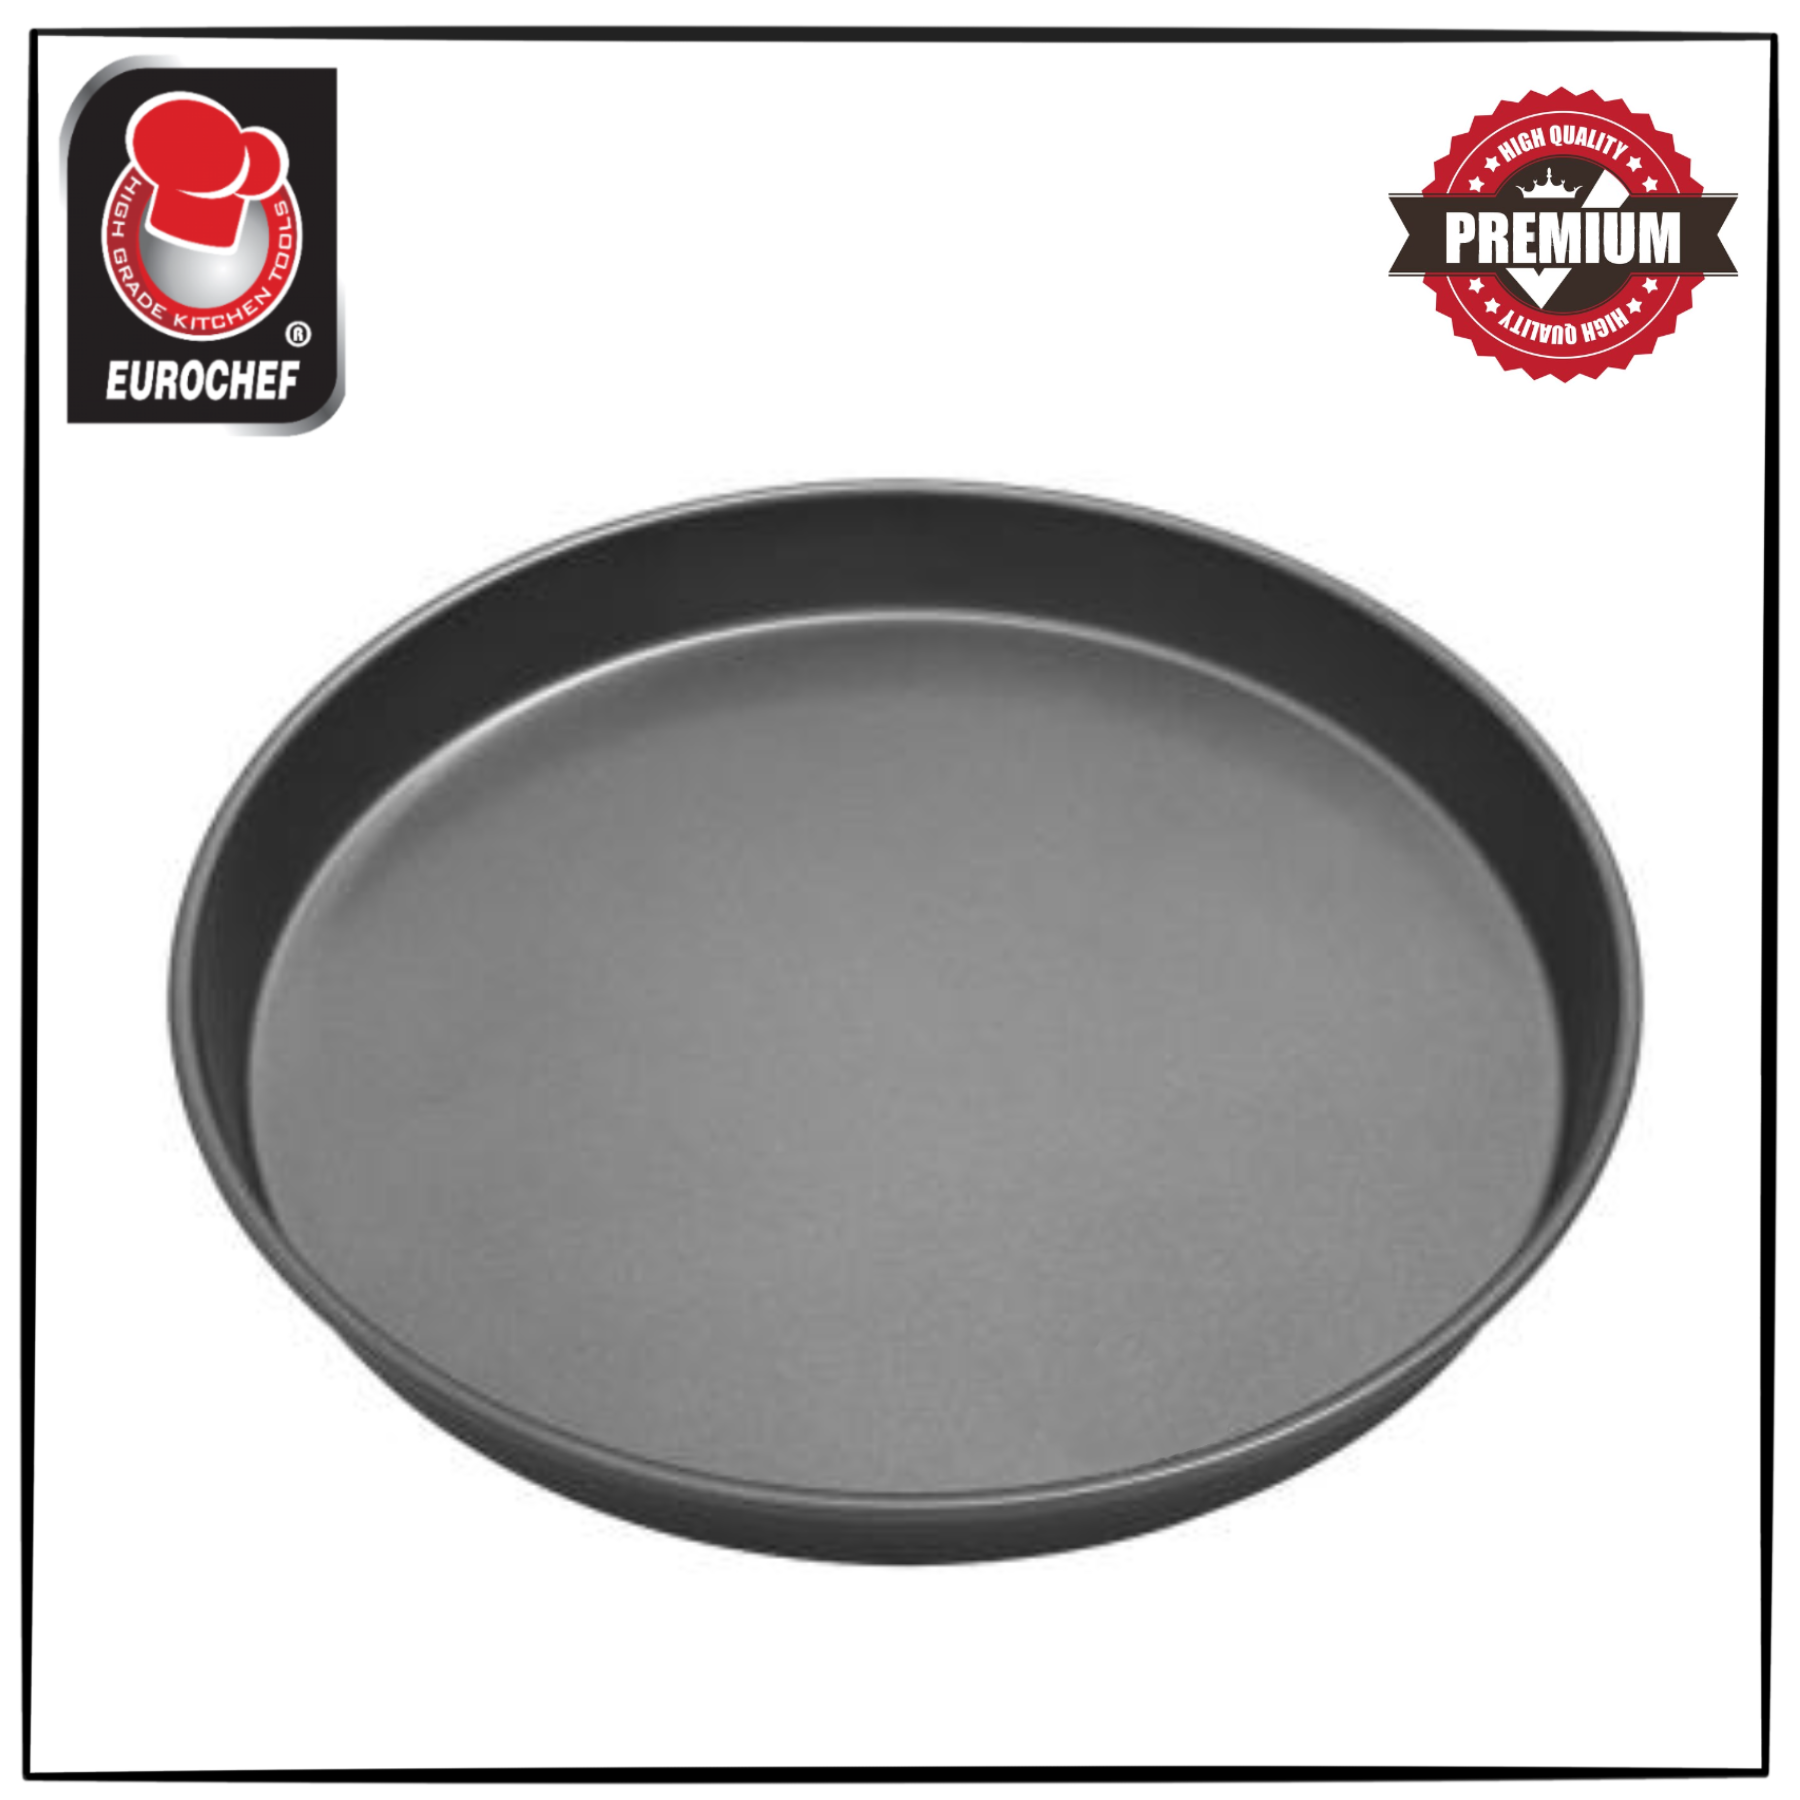 10 Inch Non Stick Pizza Tray Carbon Steel Baking Round Oven Pizza Pan Plate 